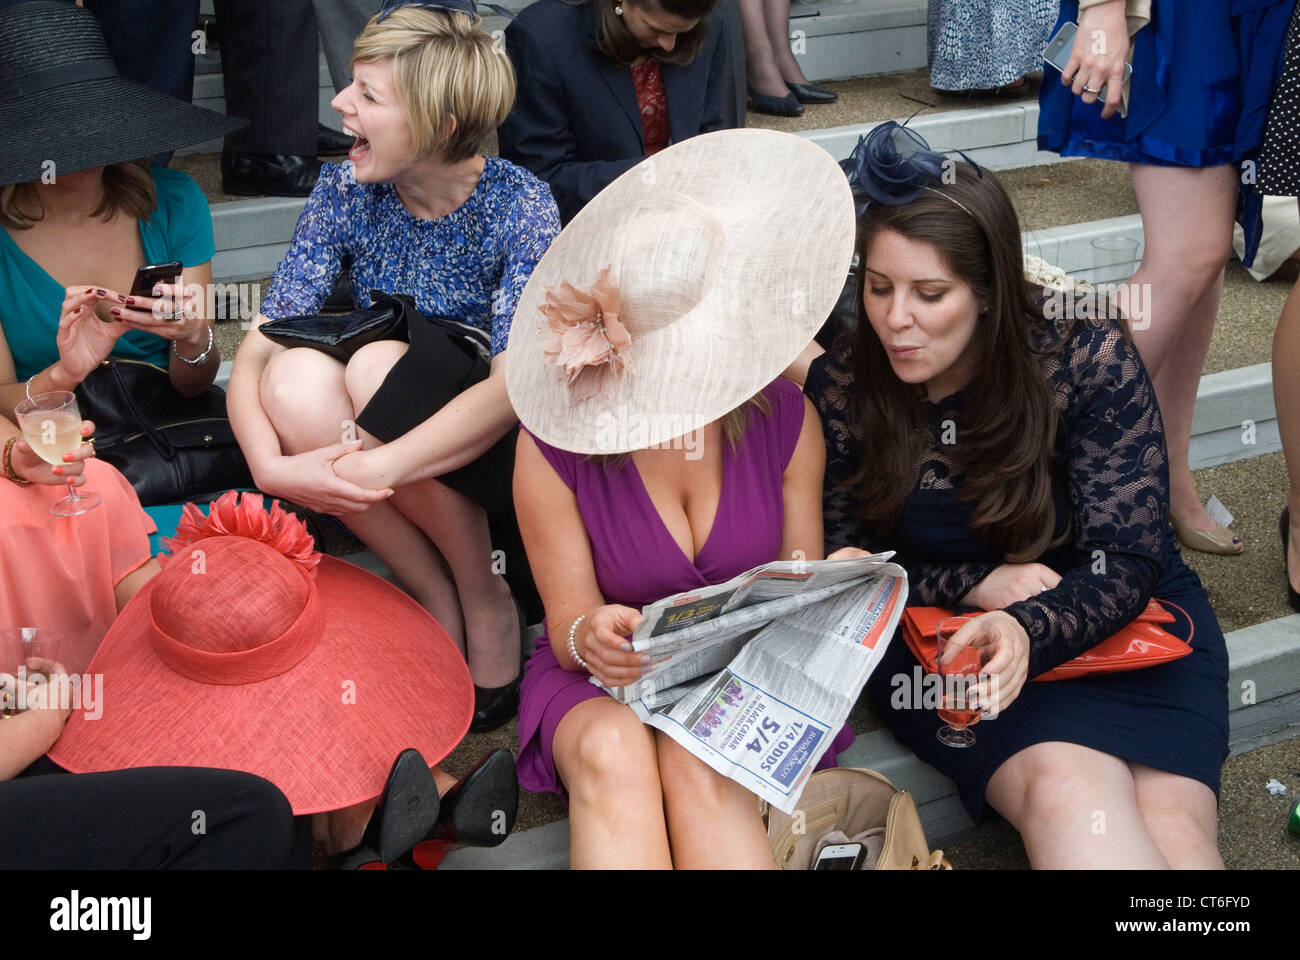 New dress older woman showing her cleavage. Two women reading the newspaper together sitting down A day at the races, horse racing Royal Ascot, Berkshire England  2012, 2010s UK HOMER SYKES Stock Photo